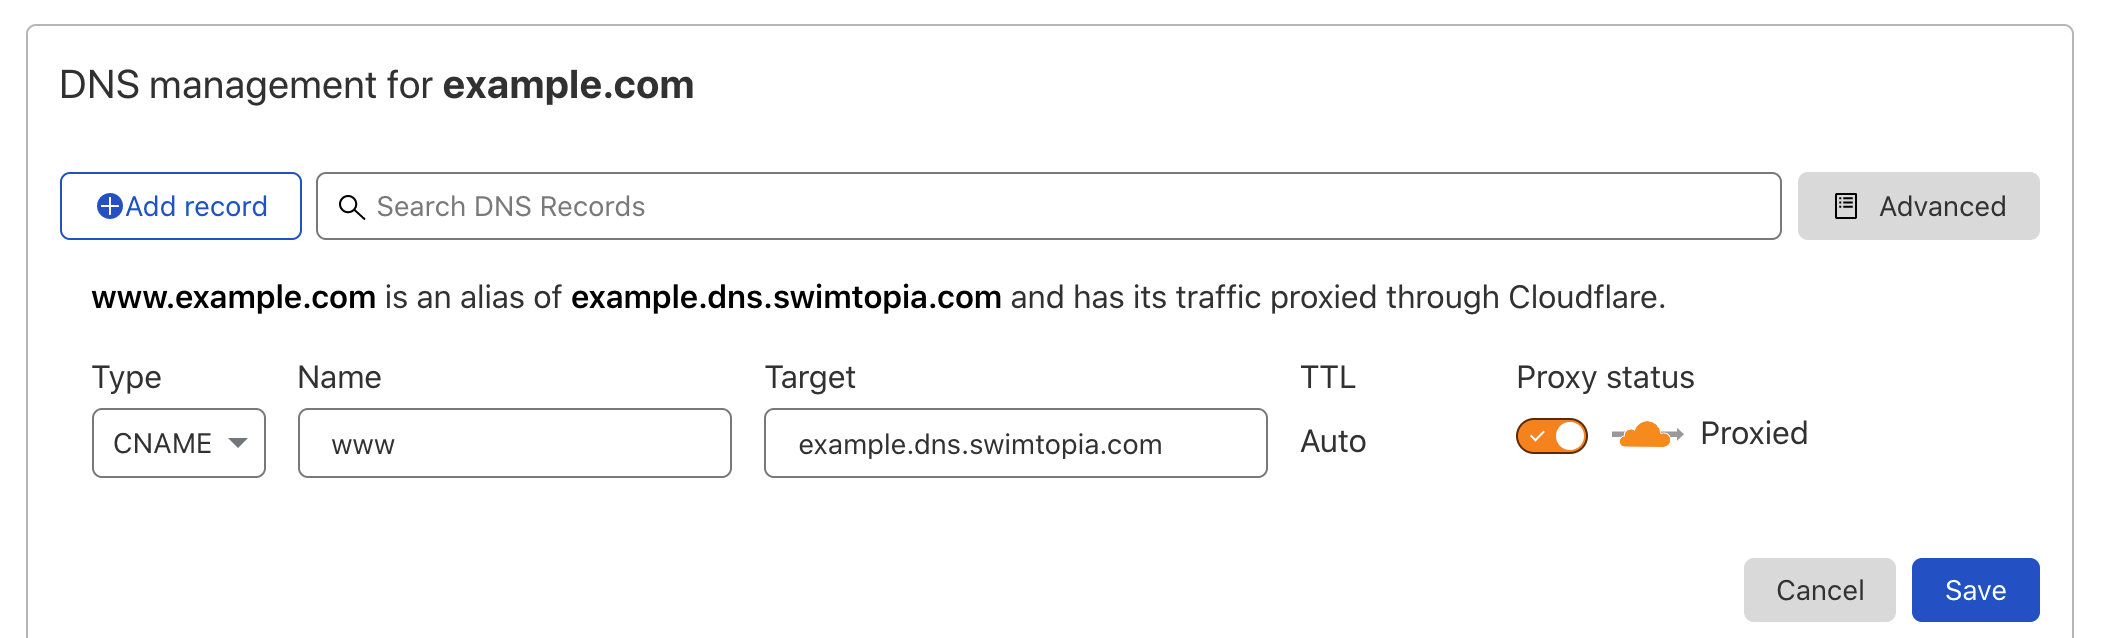 DNS___membertopia_org___Account___Cloudflare_-_Web_Performance___Security.png